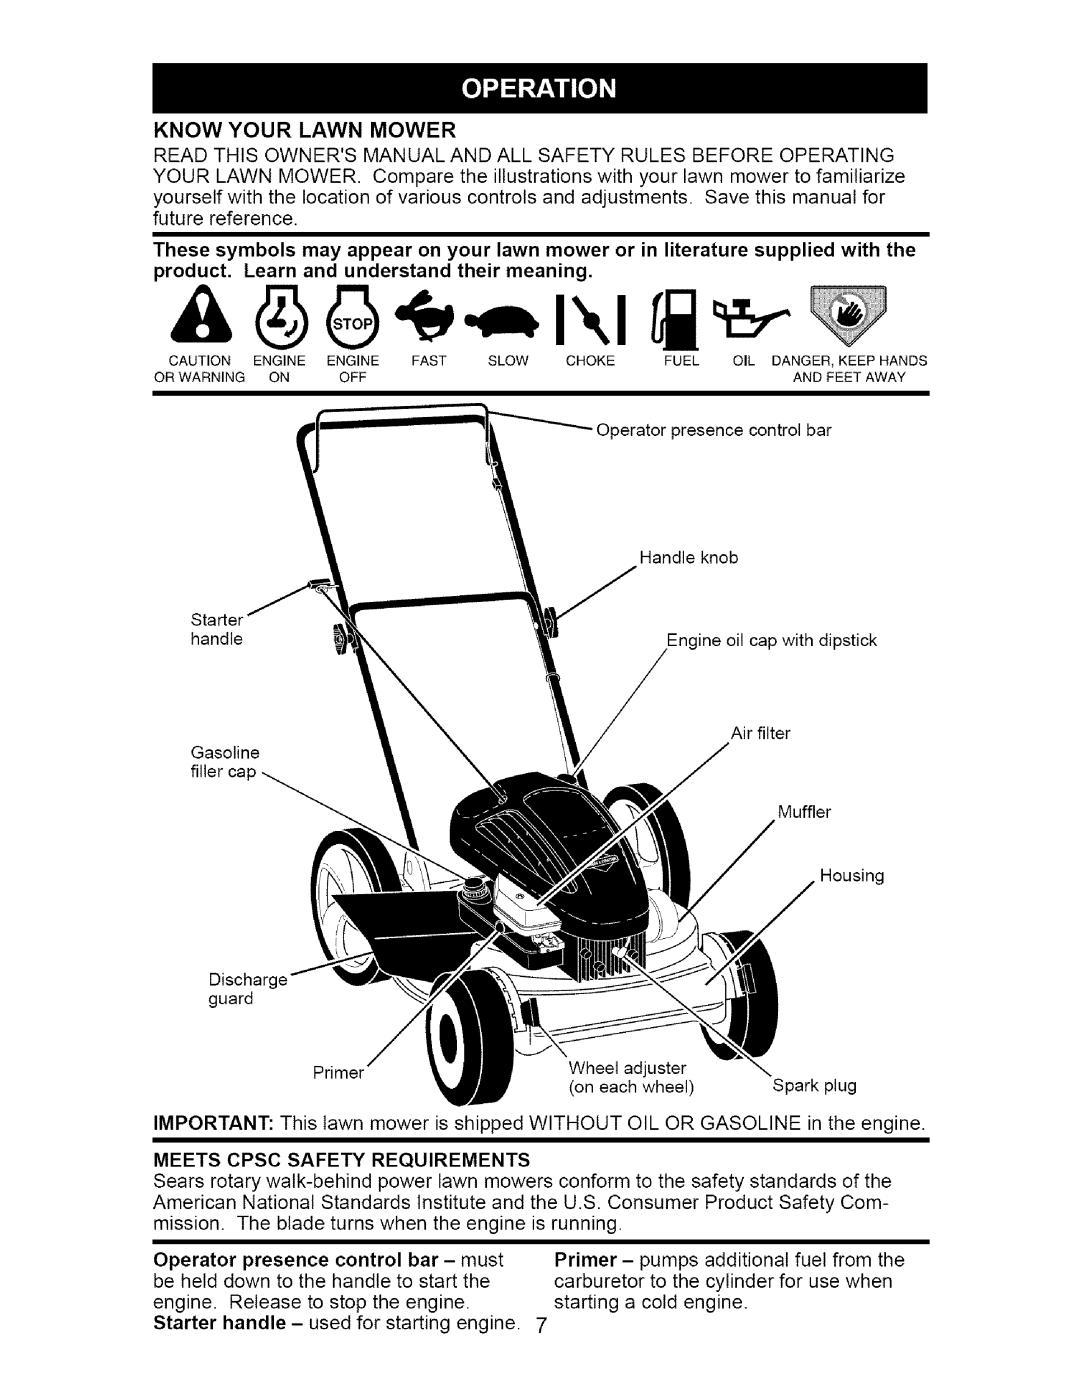 Craftsman 917.385140 Know Your Lawn Mower, product. Learn and understand their meaning, Meets Cpsc Safety Requirements 